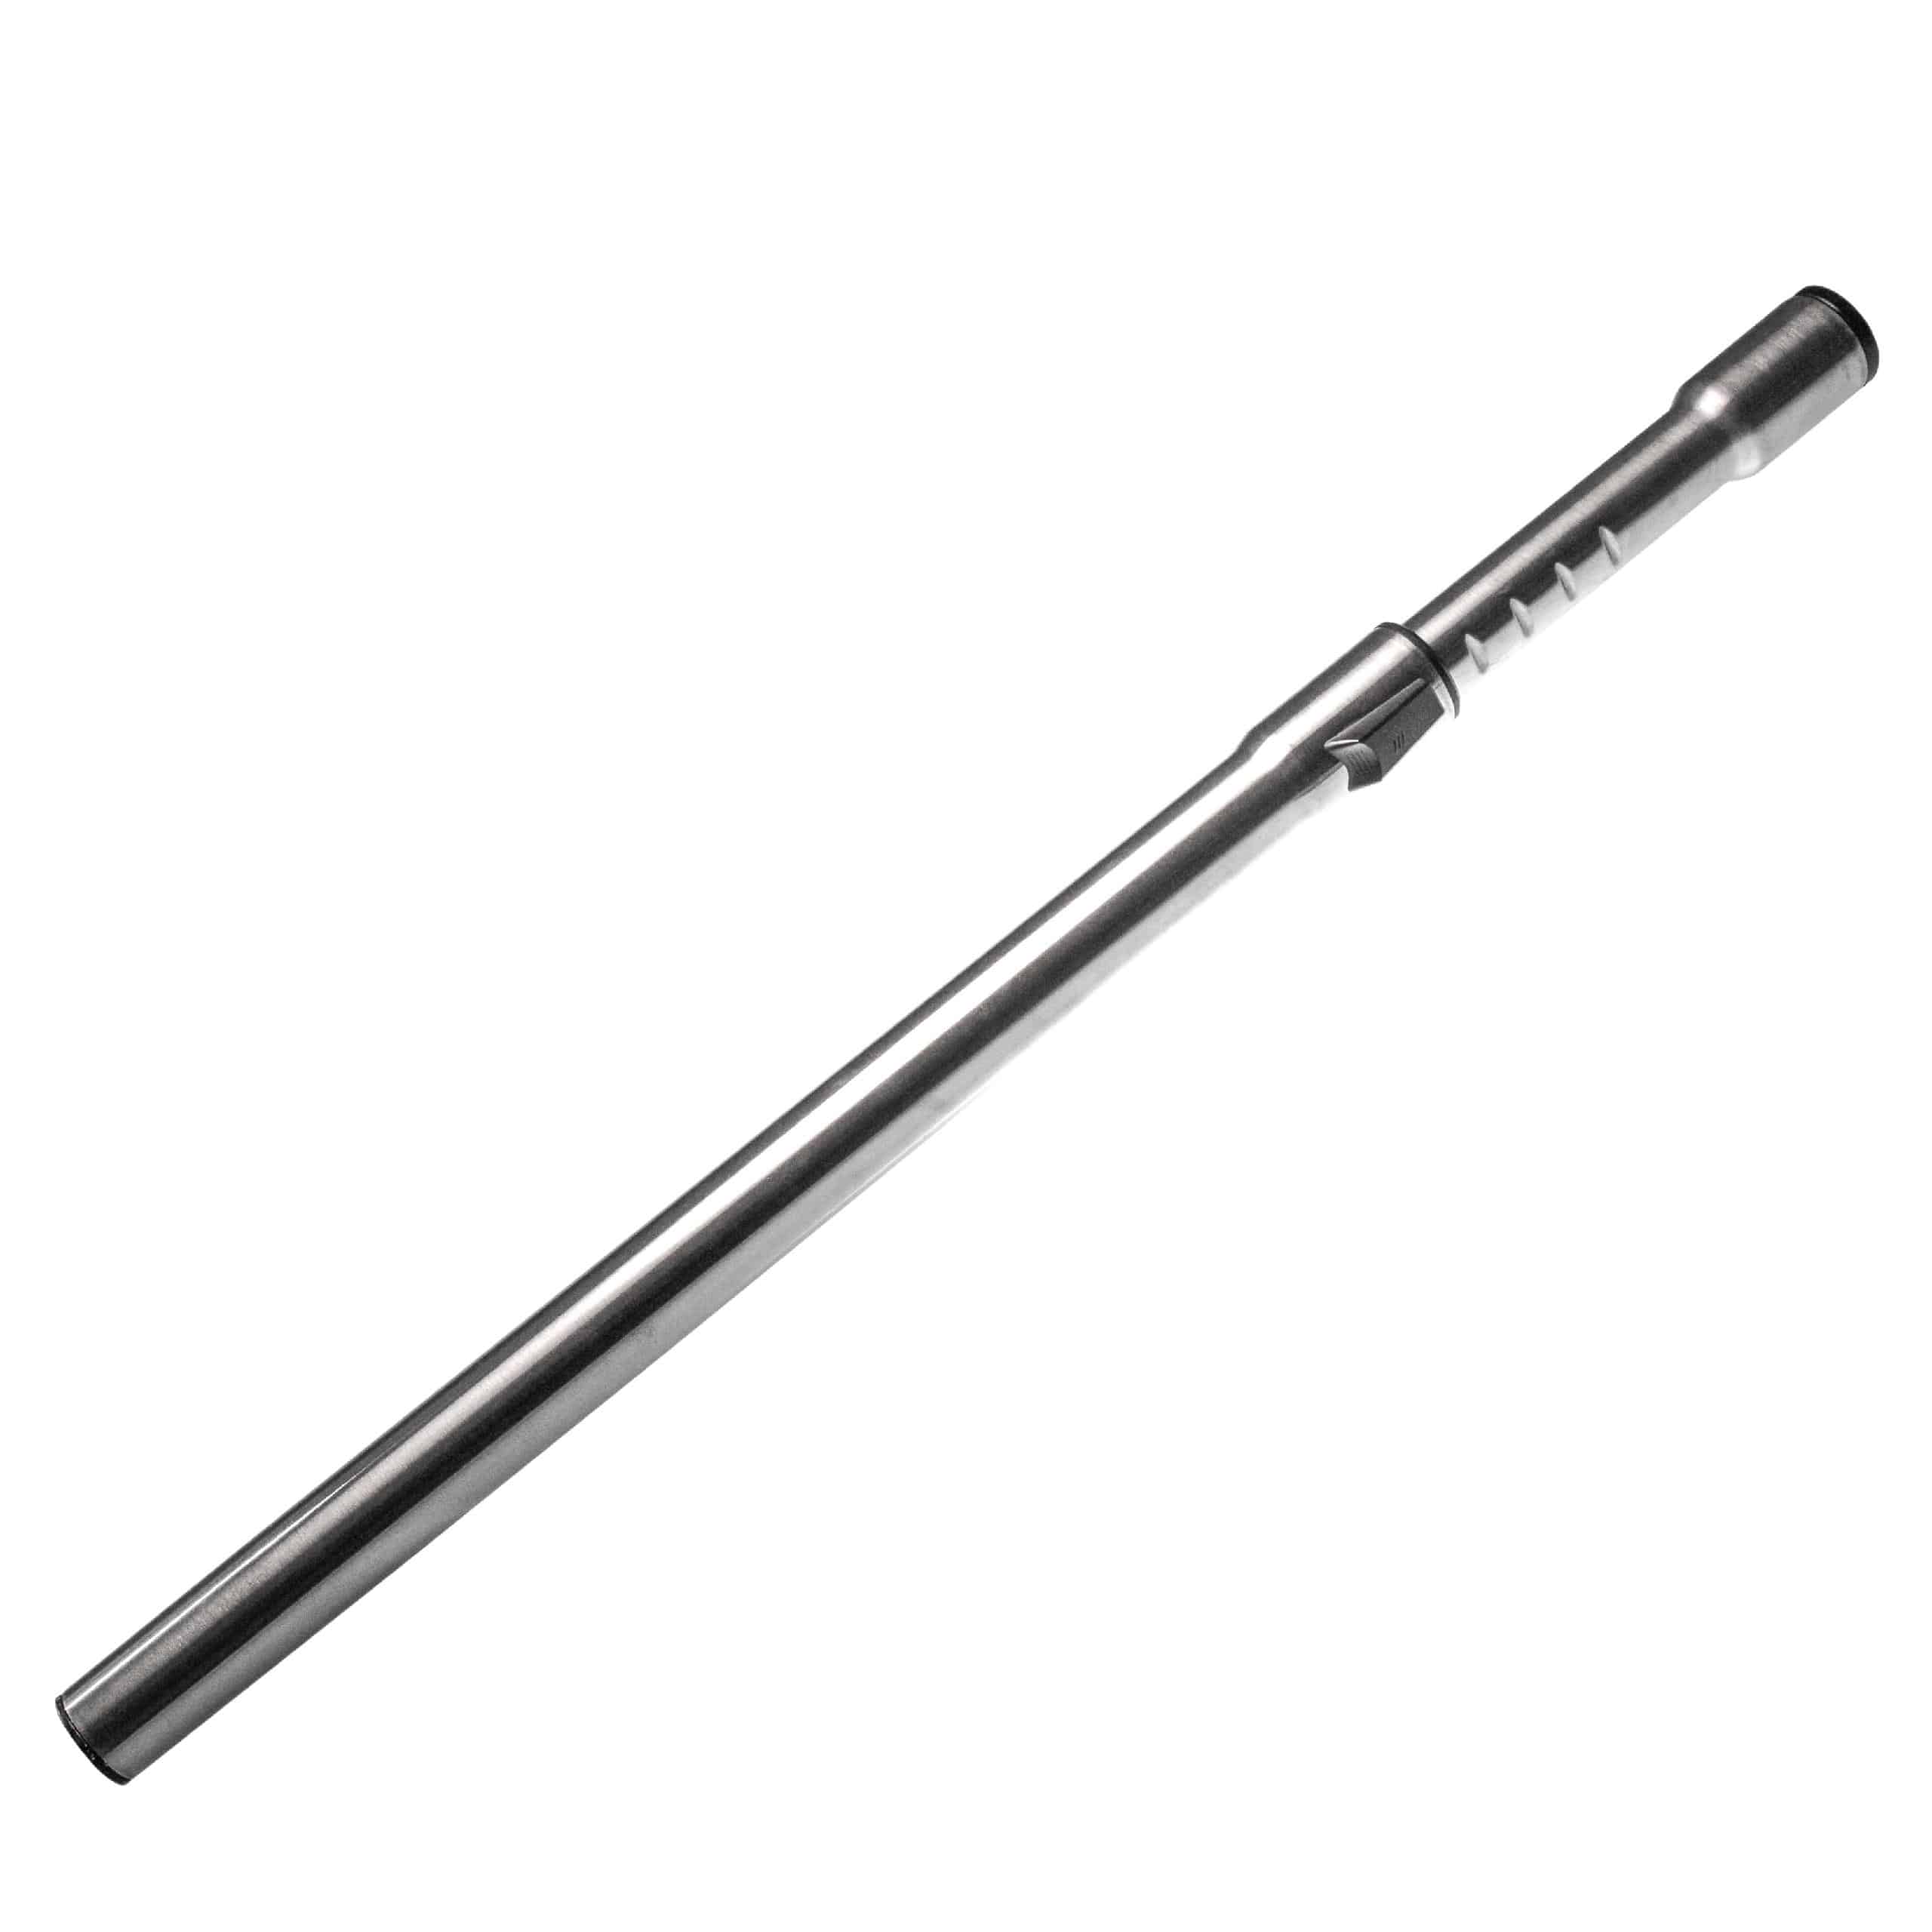 Tube for Miele s8360, S 360, S 380 vacuum cleaner - Length: 60 - 100 cm, black / silver